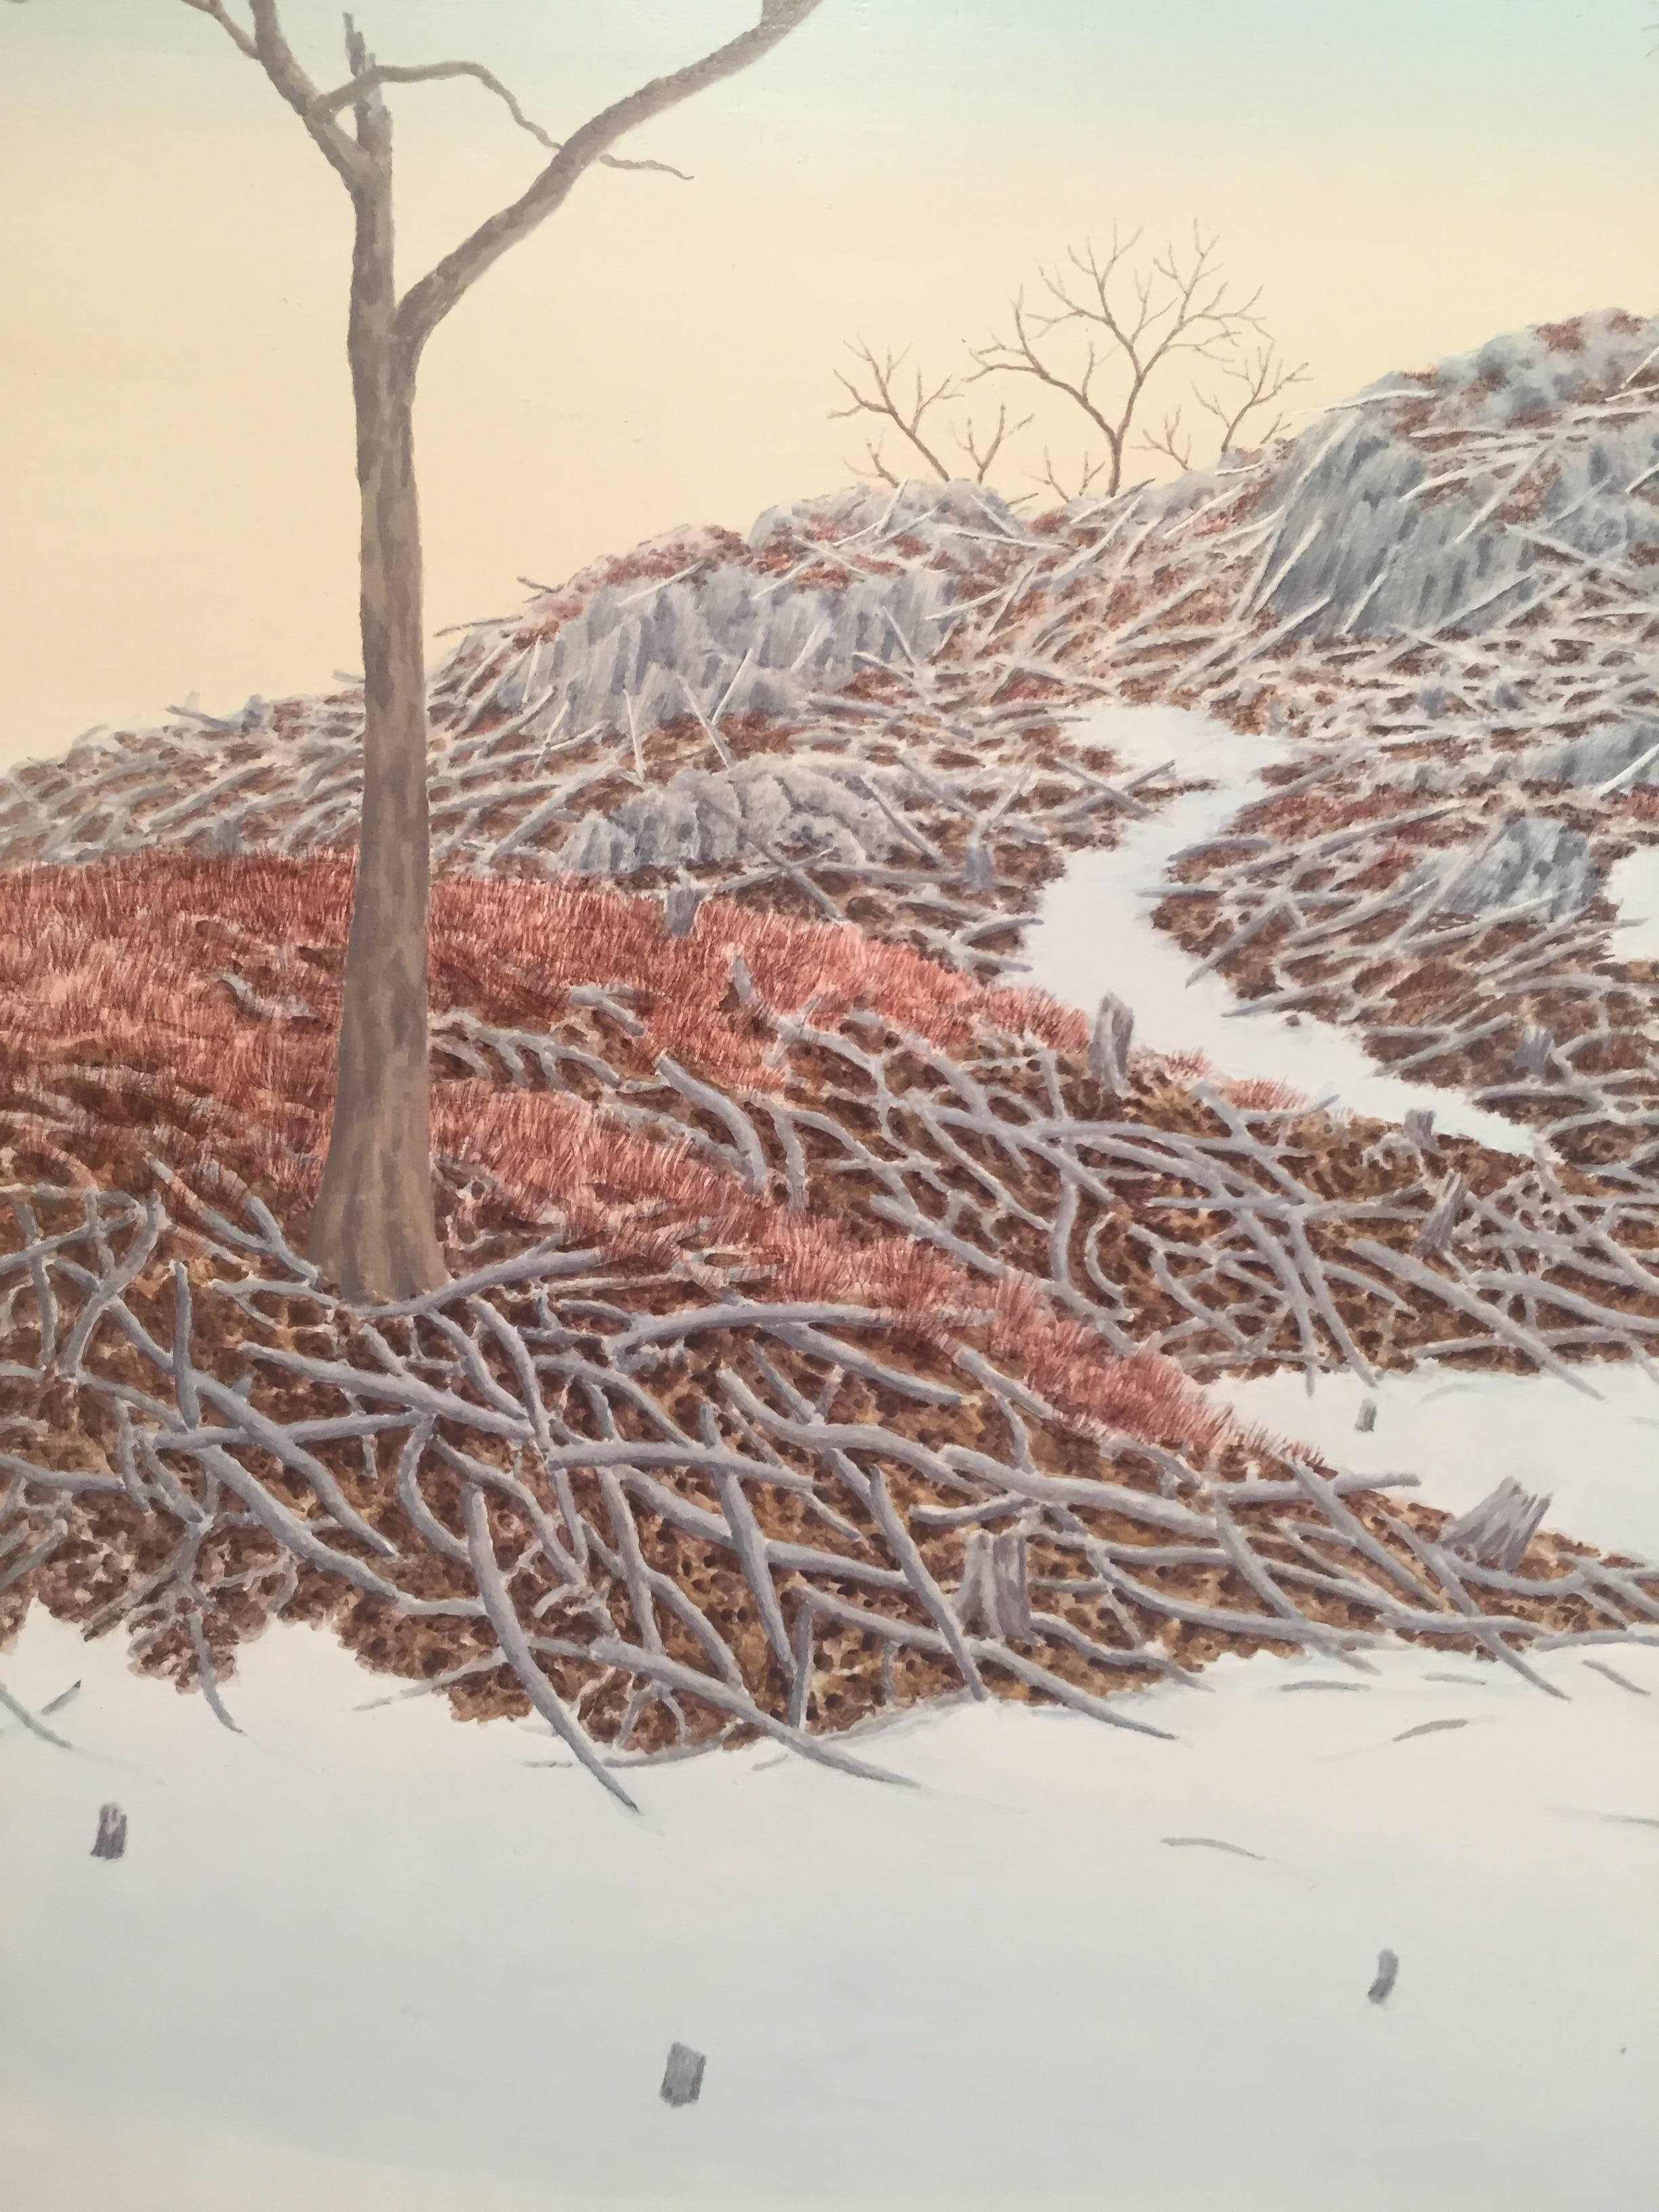 Alan Bray, Clearcut with Wildlife Trees, Casein landscape painting, 2015 3